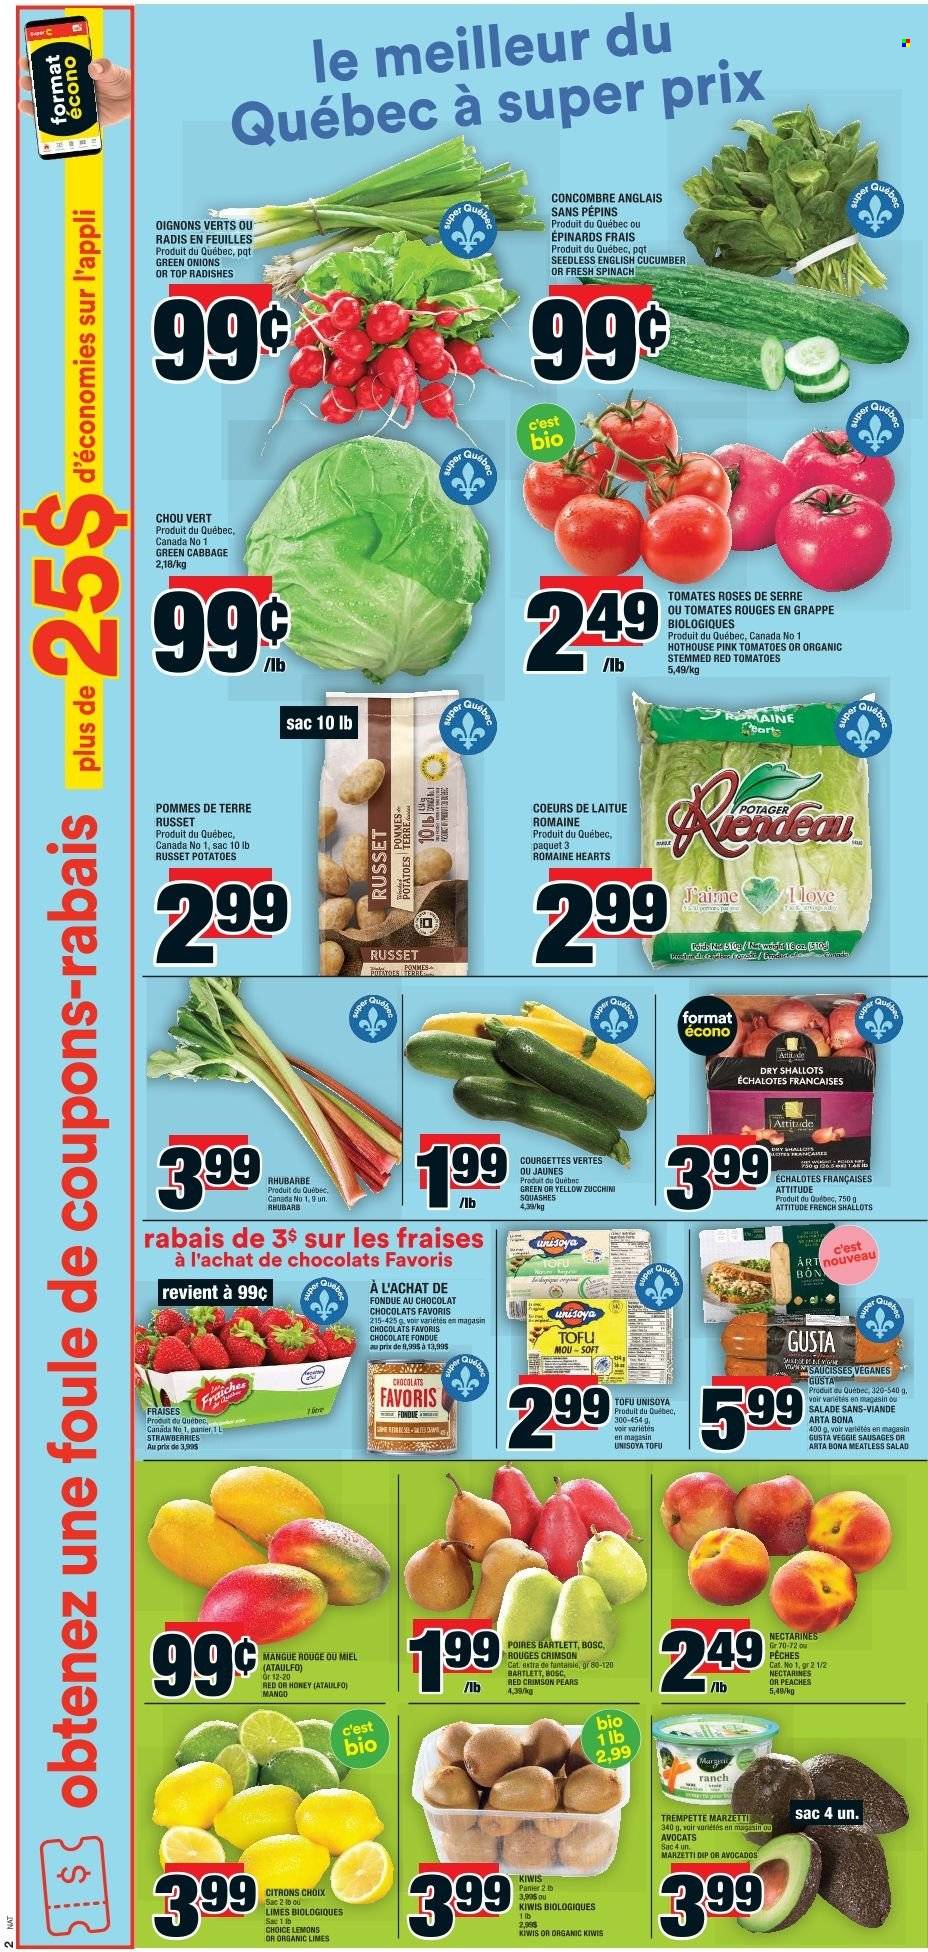 thumbnail - Super C Flyer - June 23, 2022 - June 29, 2022 - Sales products - tart, cabbage, radishes, rhubarb, russet potatoes, shallots, spinach, tomatoes, zucchini, potatoes, salad, green onion, avocado, limes, nectarines, strawberries, pears, lemons, peaches, sausage, tofu, dip, chocolate, kiwi. Page 3.